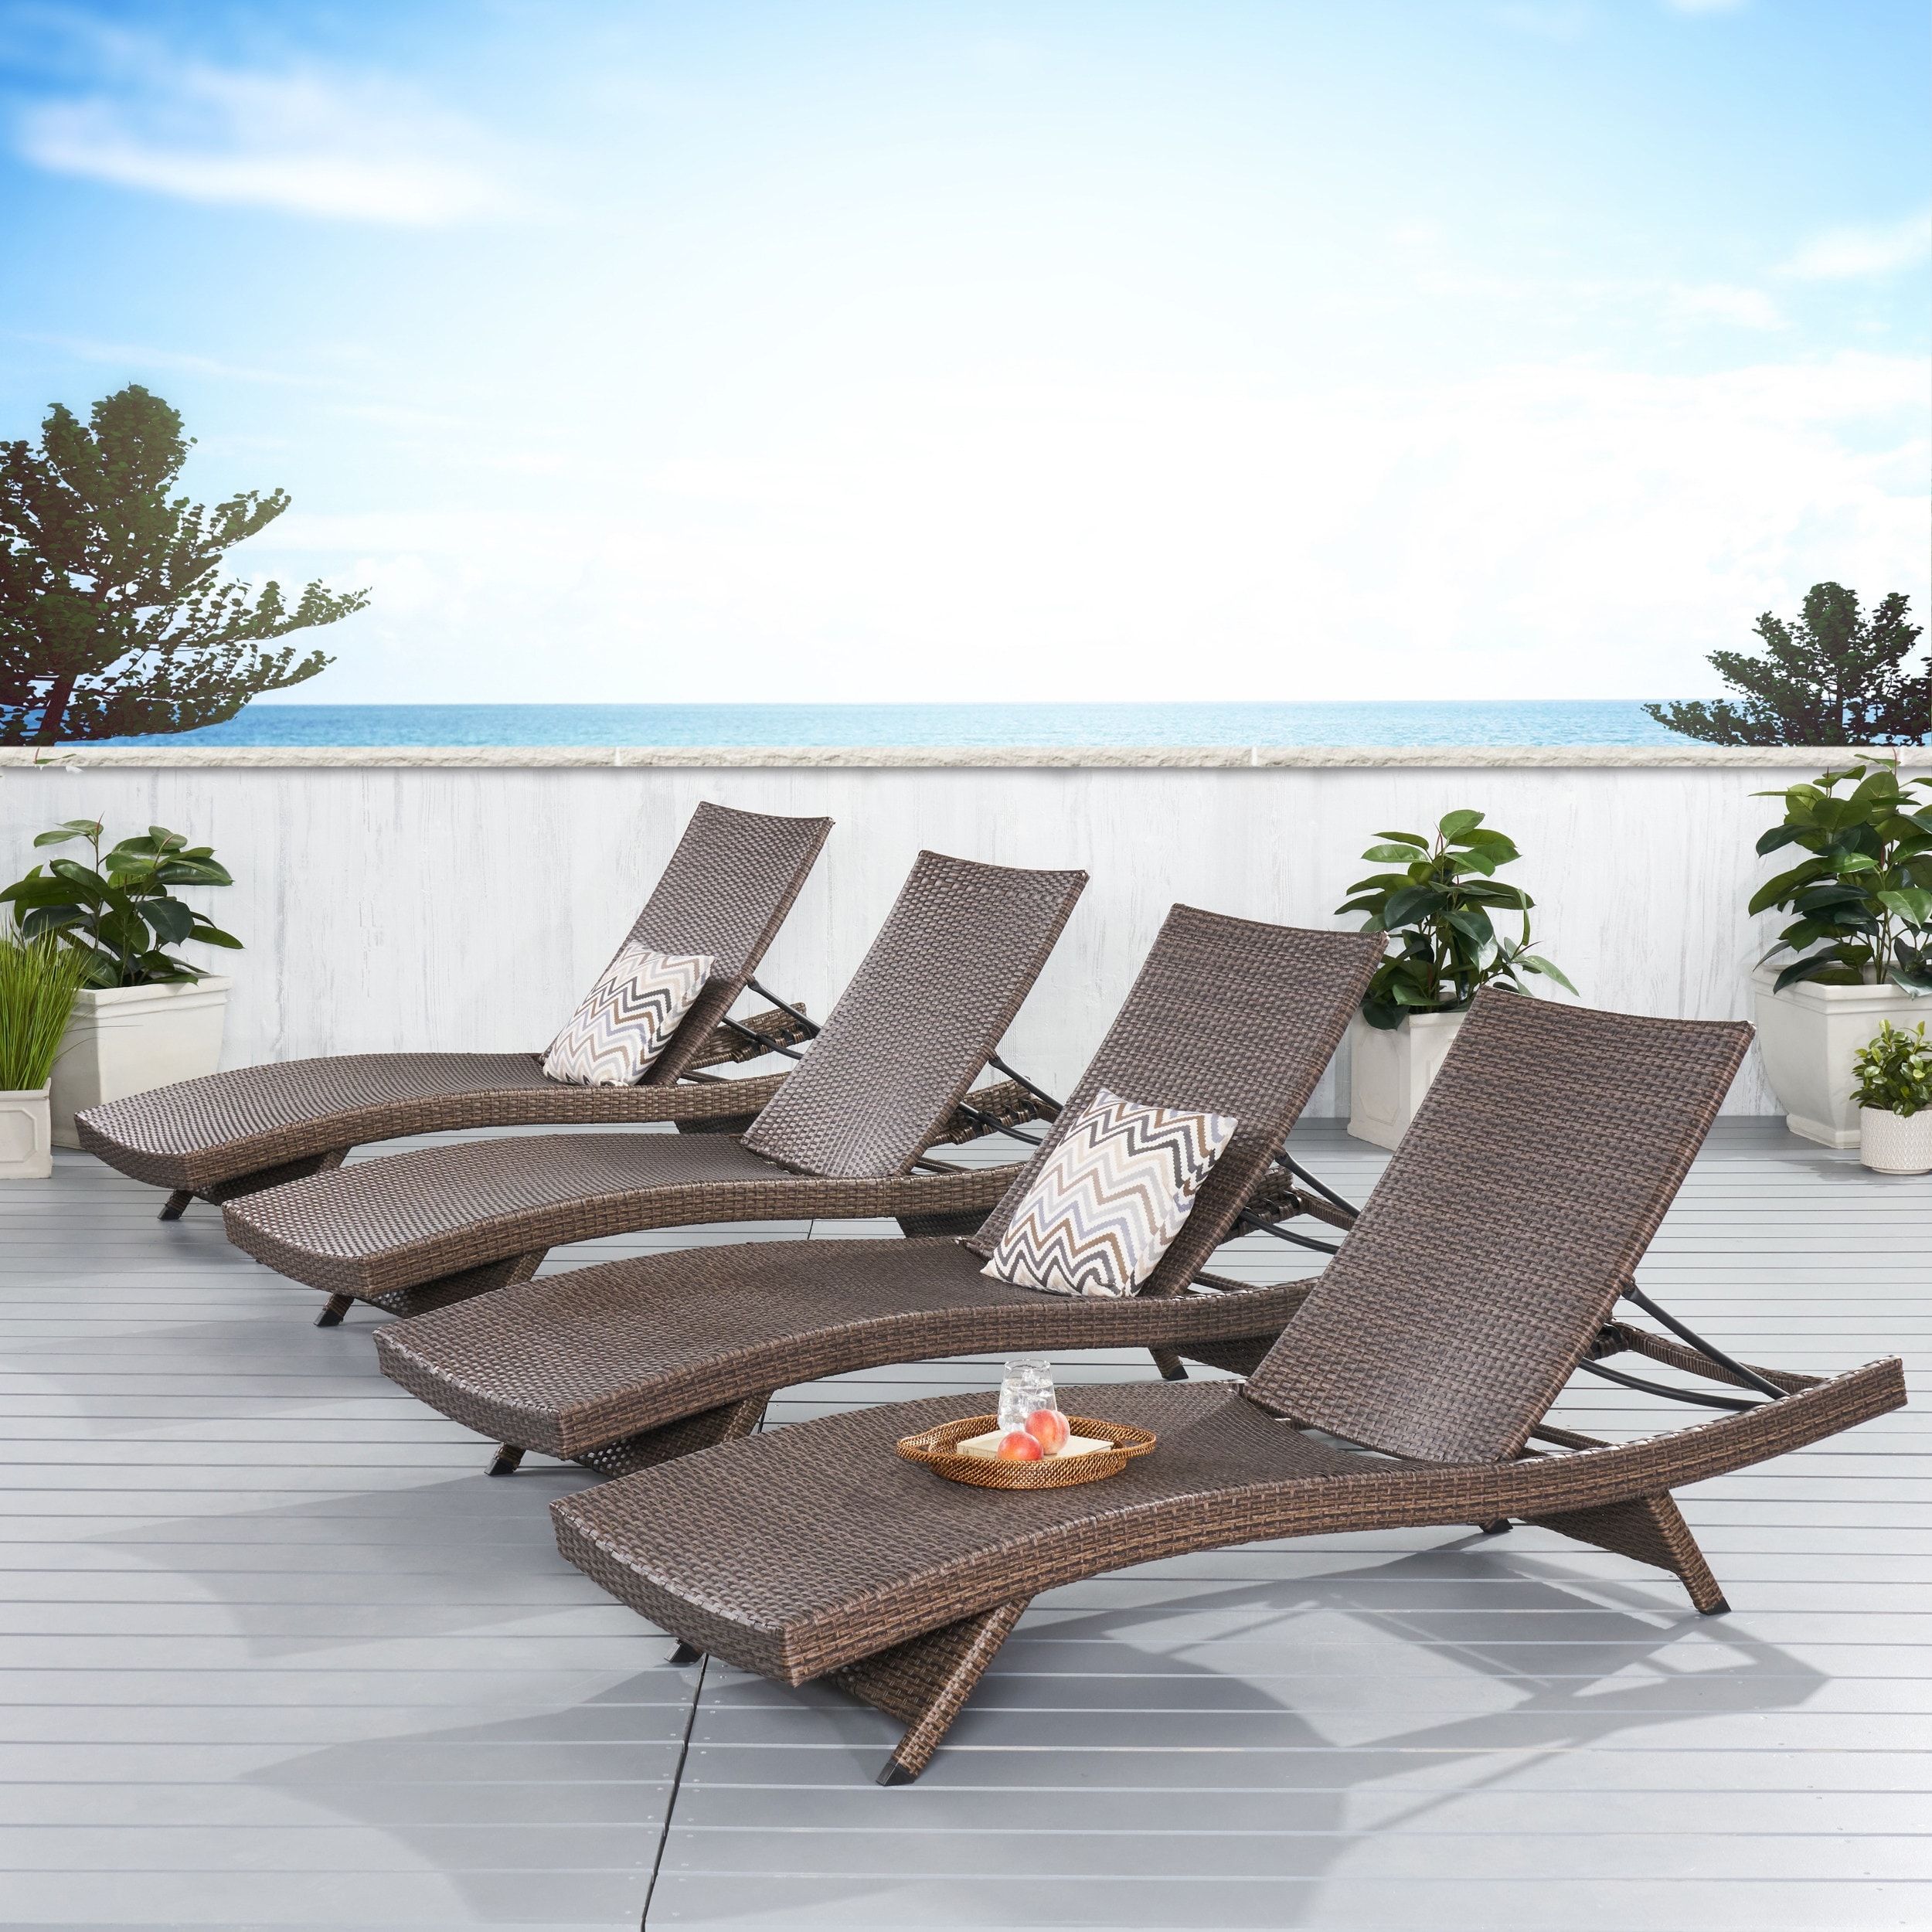 Thira Outdoor Wicker Chaise Lounge Chair (set Of 4) By Christopher Knight Home